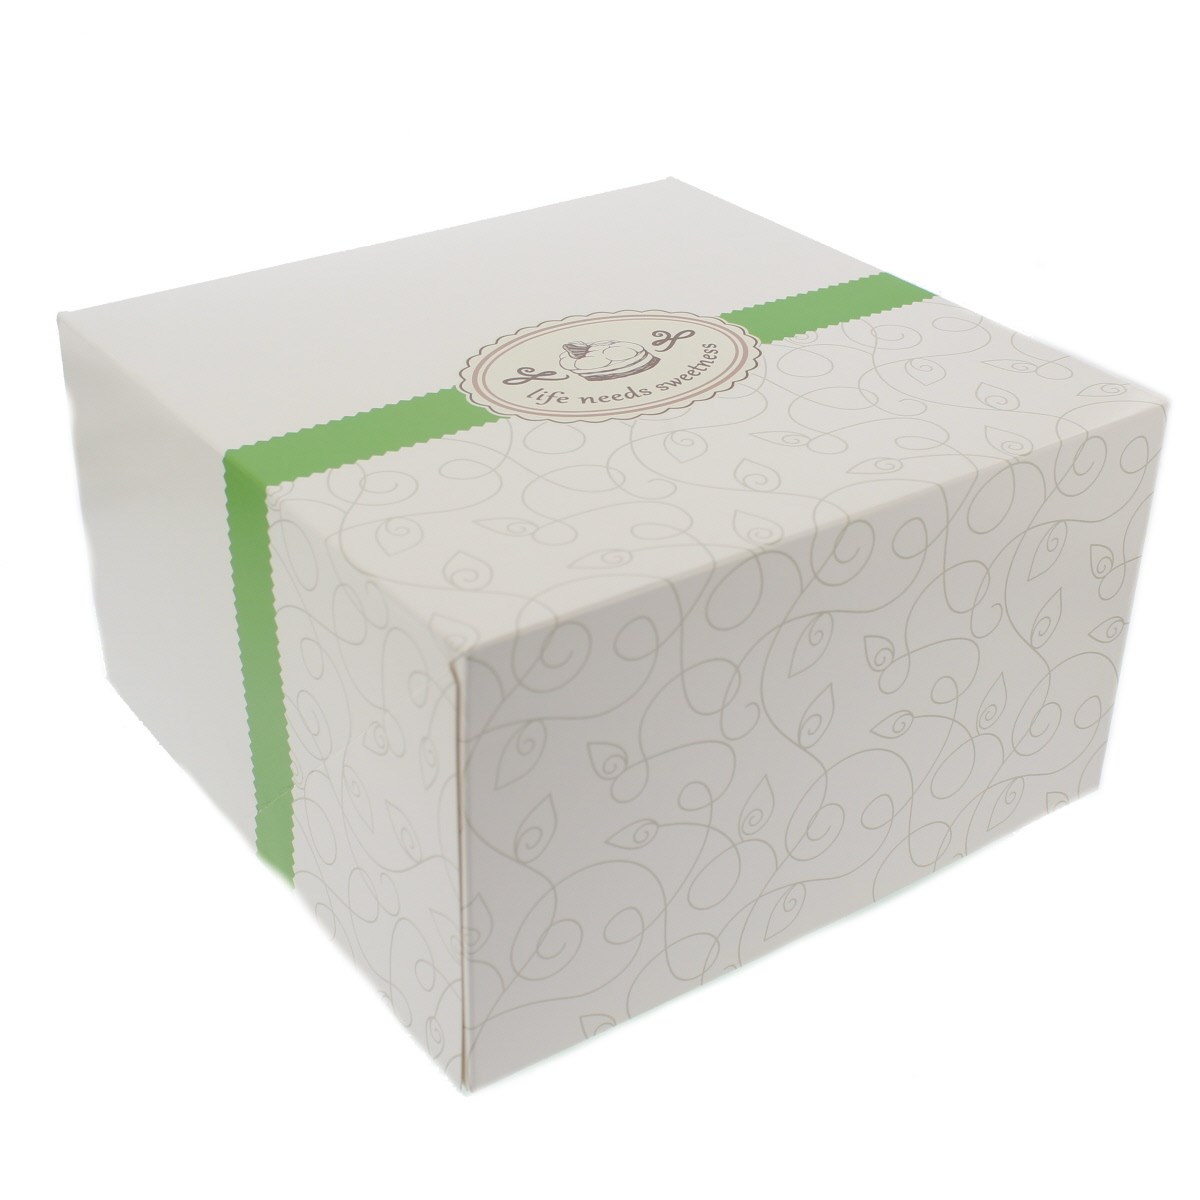 Custom Printed Cake Boxes  Wholesale Cake Packaging Boxes